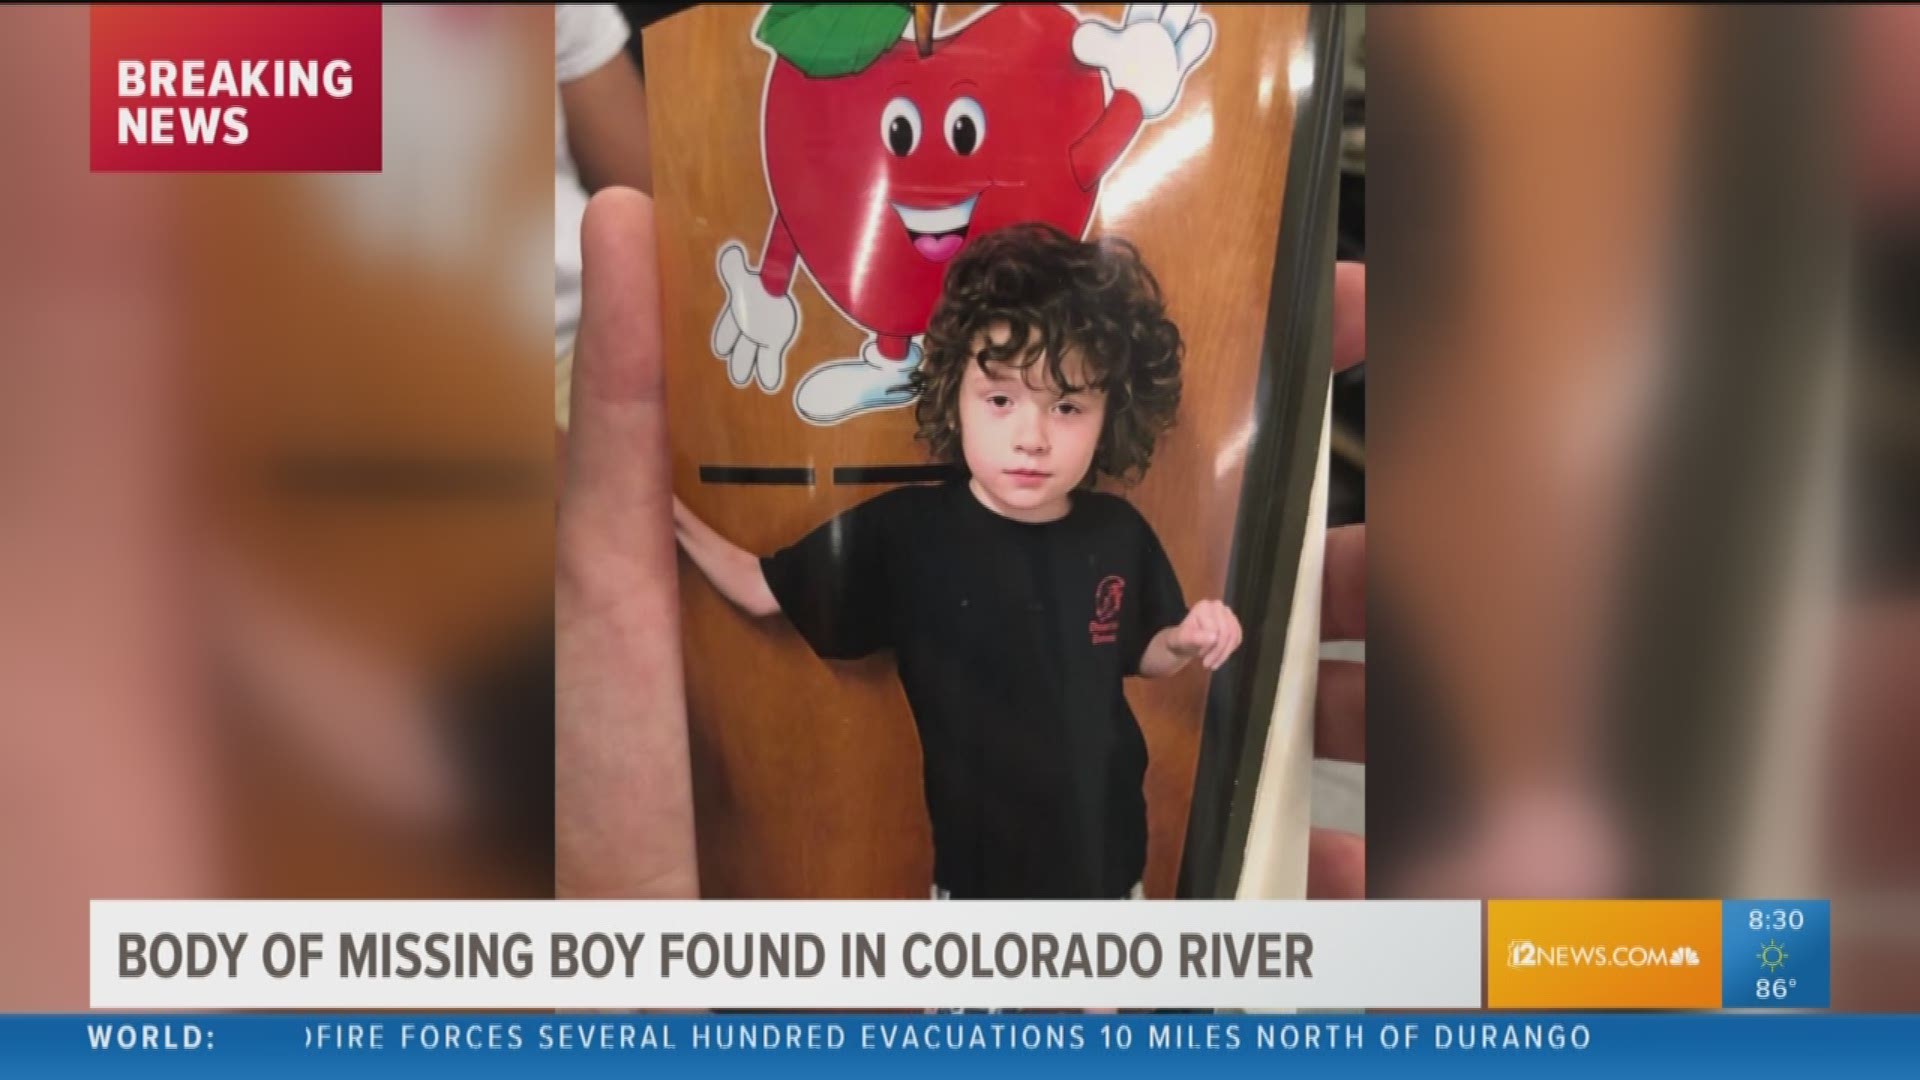 Police said they found a body matching the description of Jeremy Duncan, the boy with autism who went missing Saturday morning.